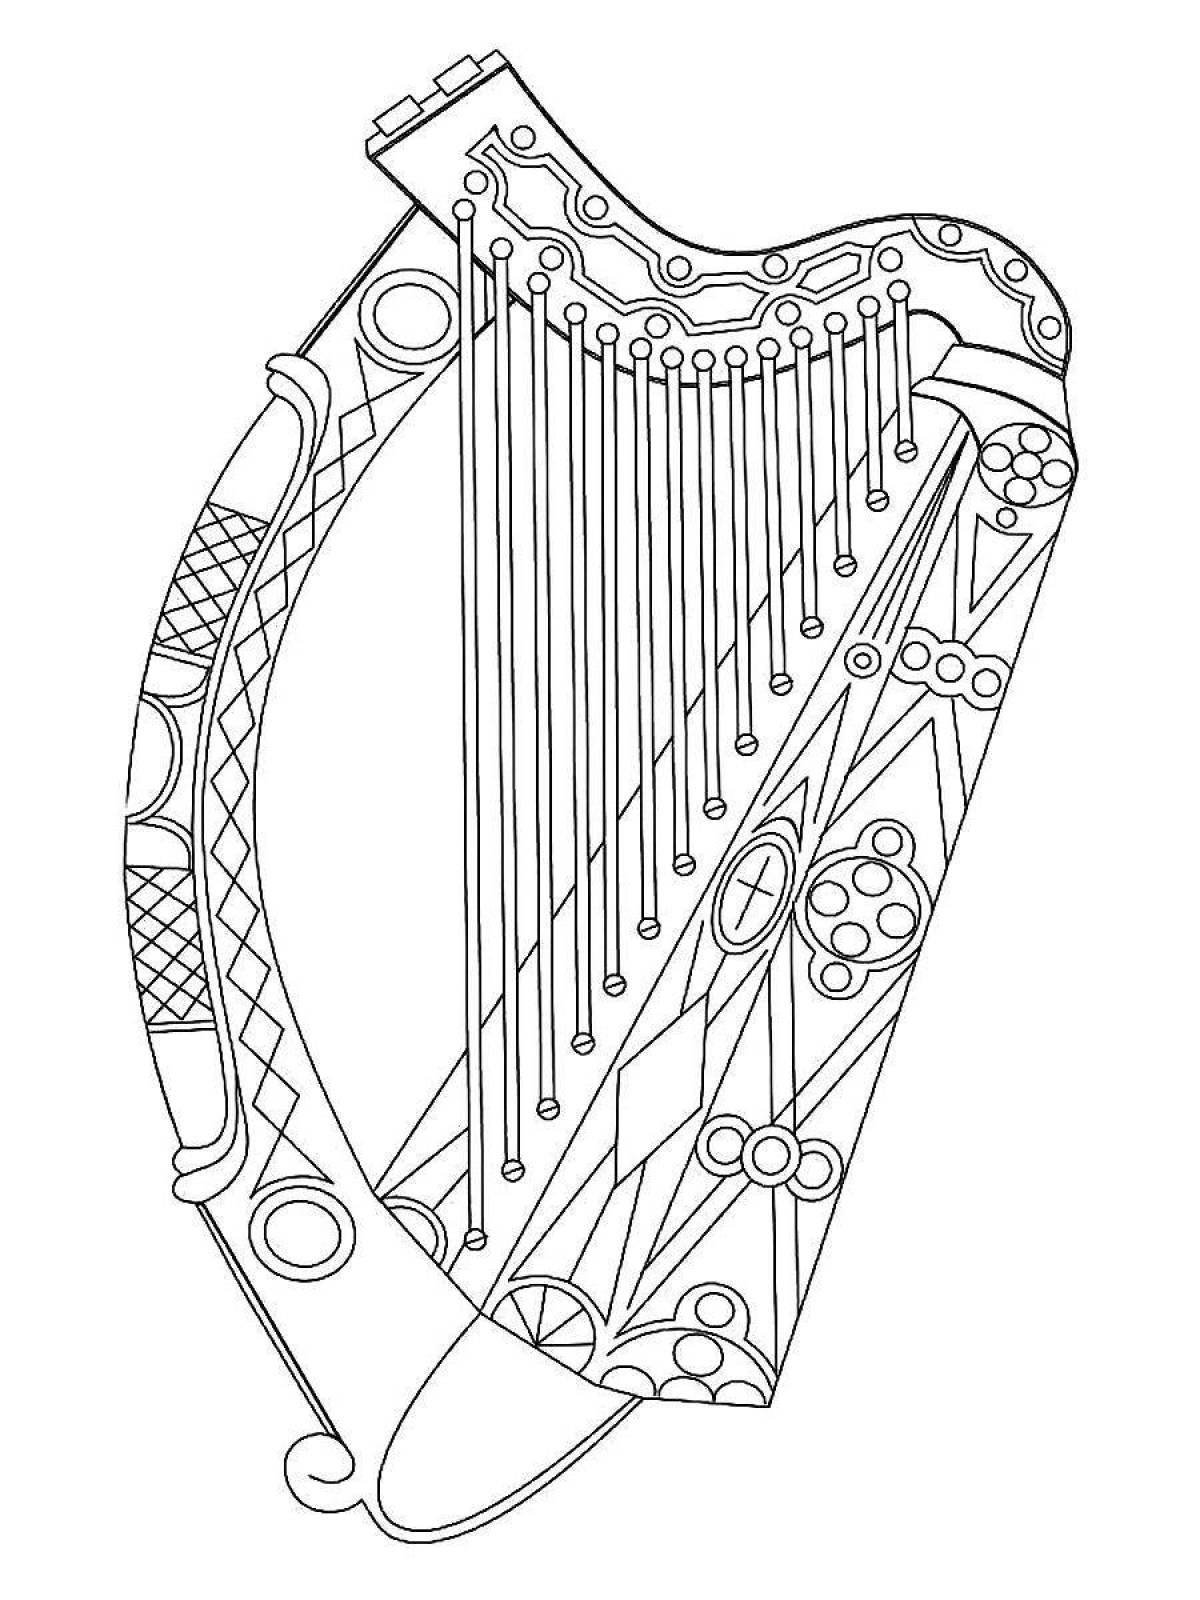 Drawing of a poetic harp